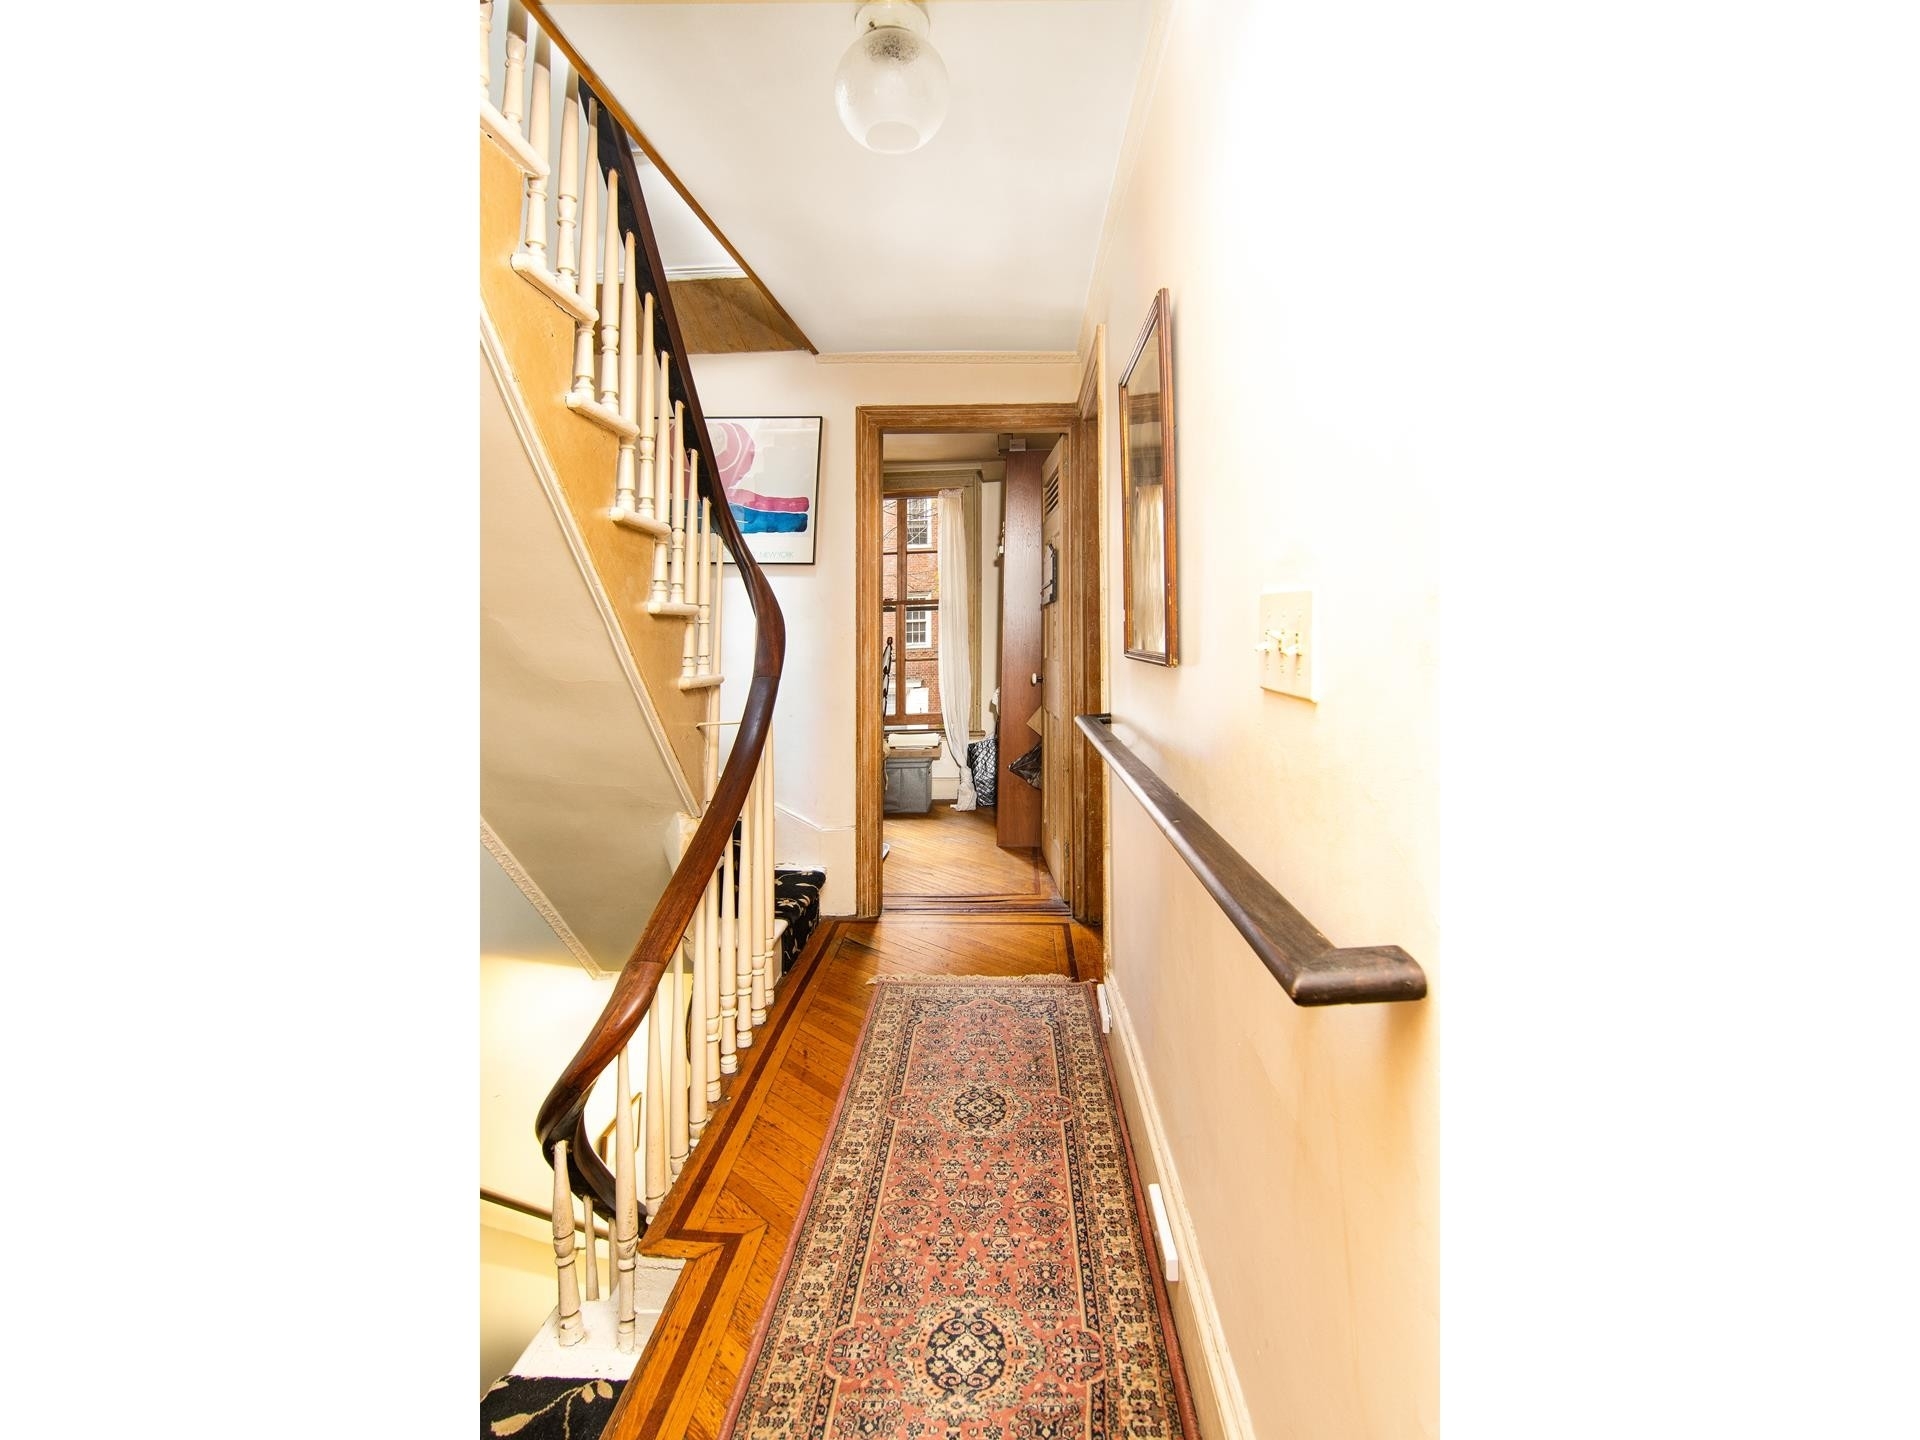 31. Single Family Townhouse for Sale at 69 ORANGE ST, TOWNHOUSE Brooklyn Heights, Brooklyn, New York 11201